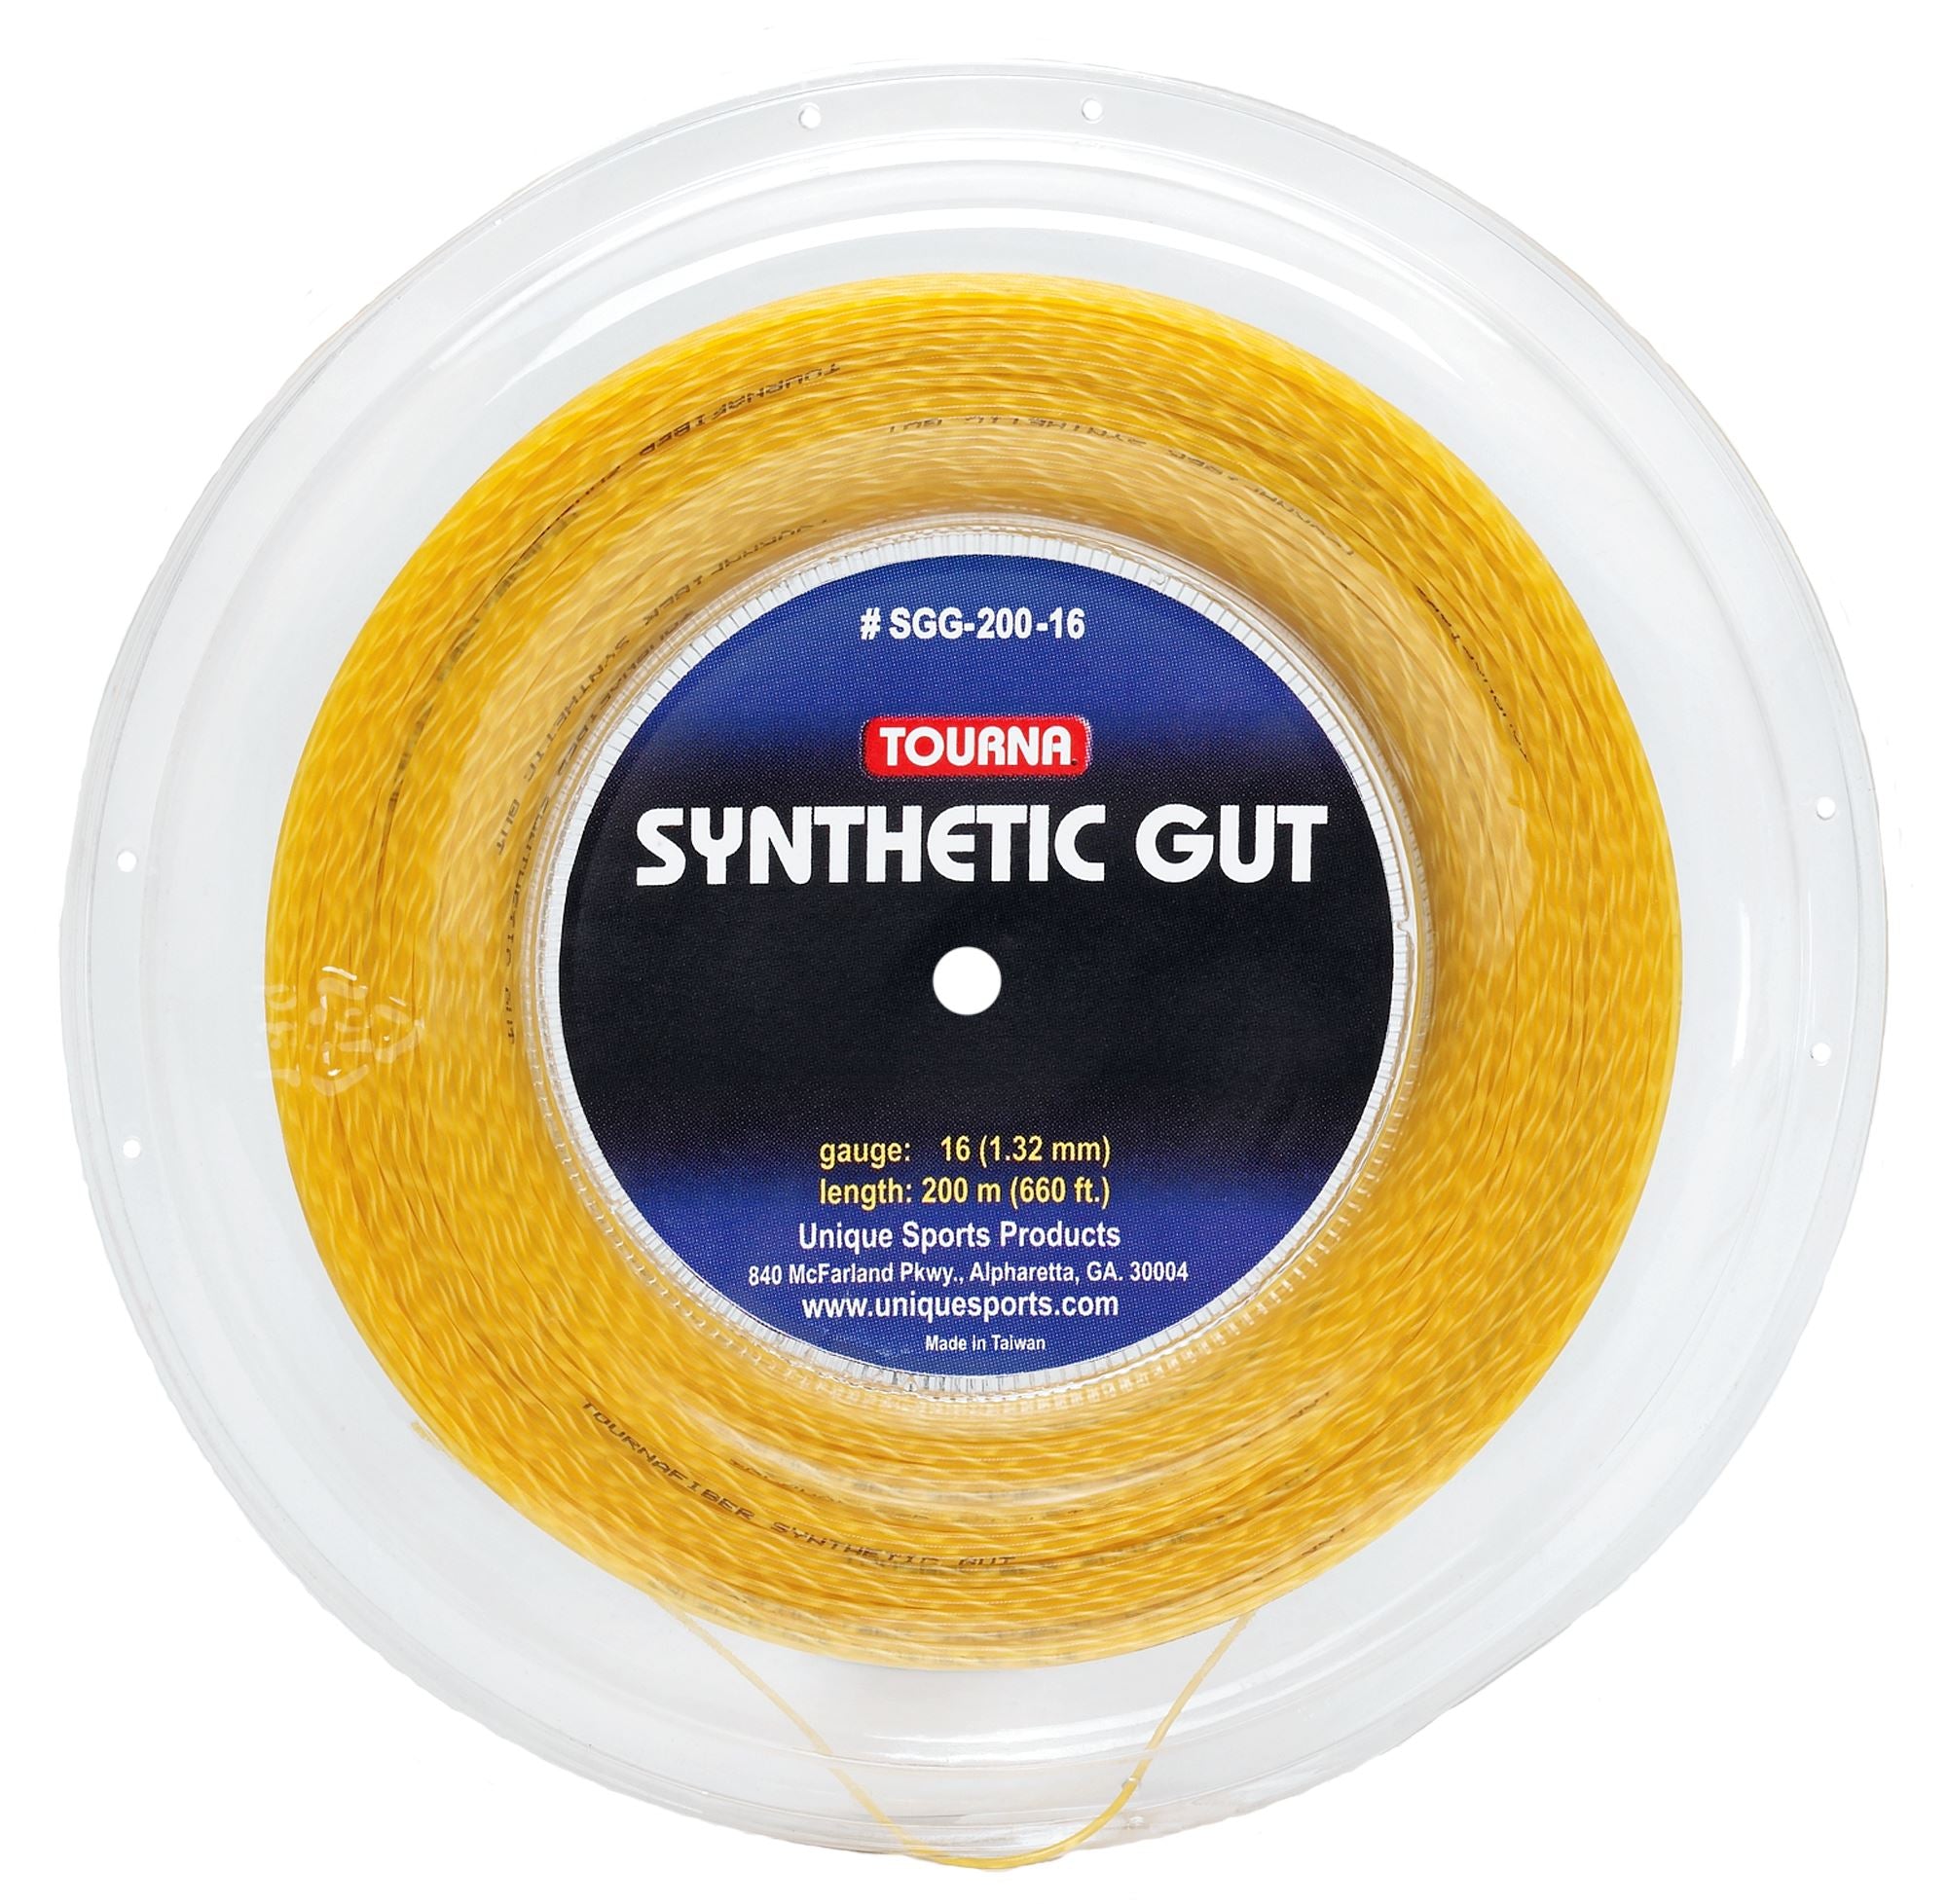 Wilson Synthetic Gut Power 16 Reel - Yellow Tennis String - 16